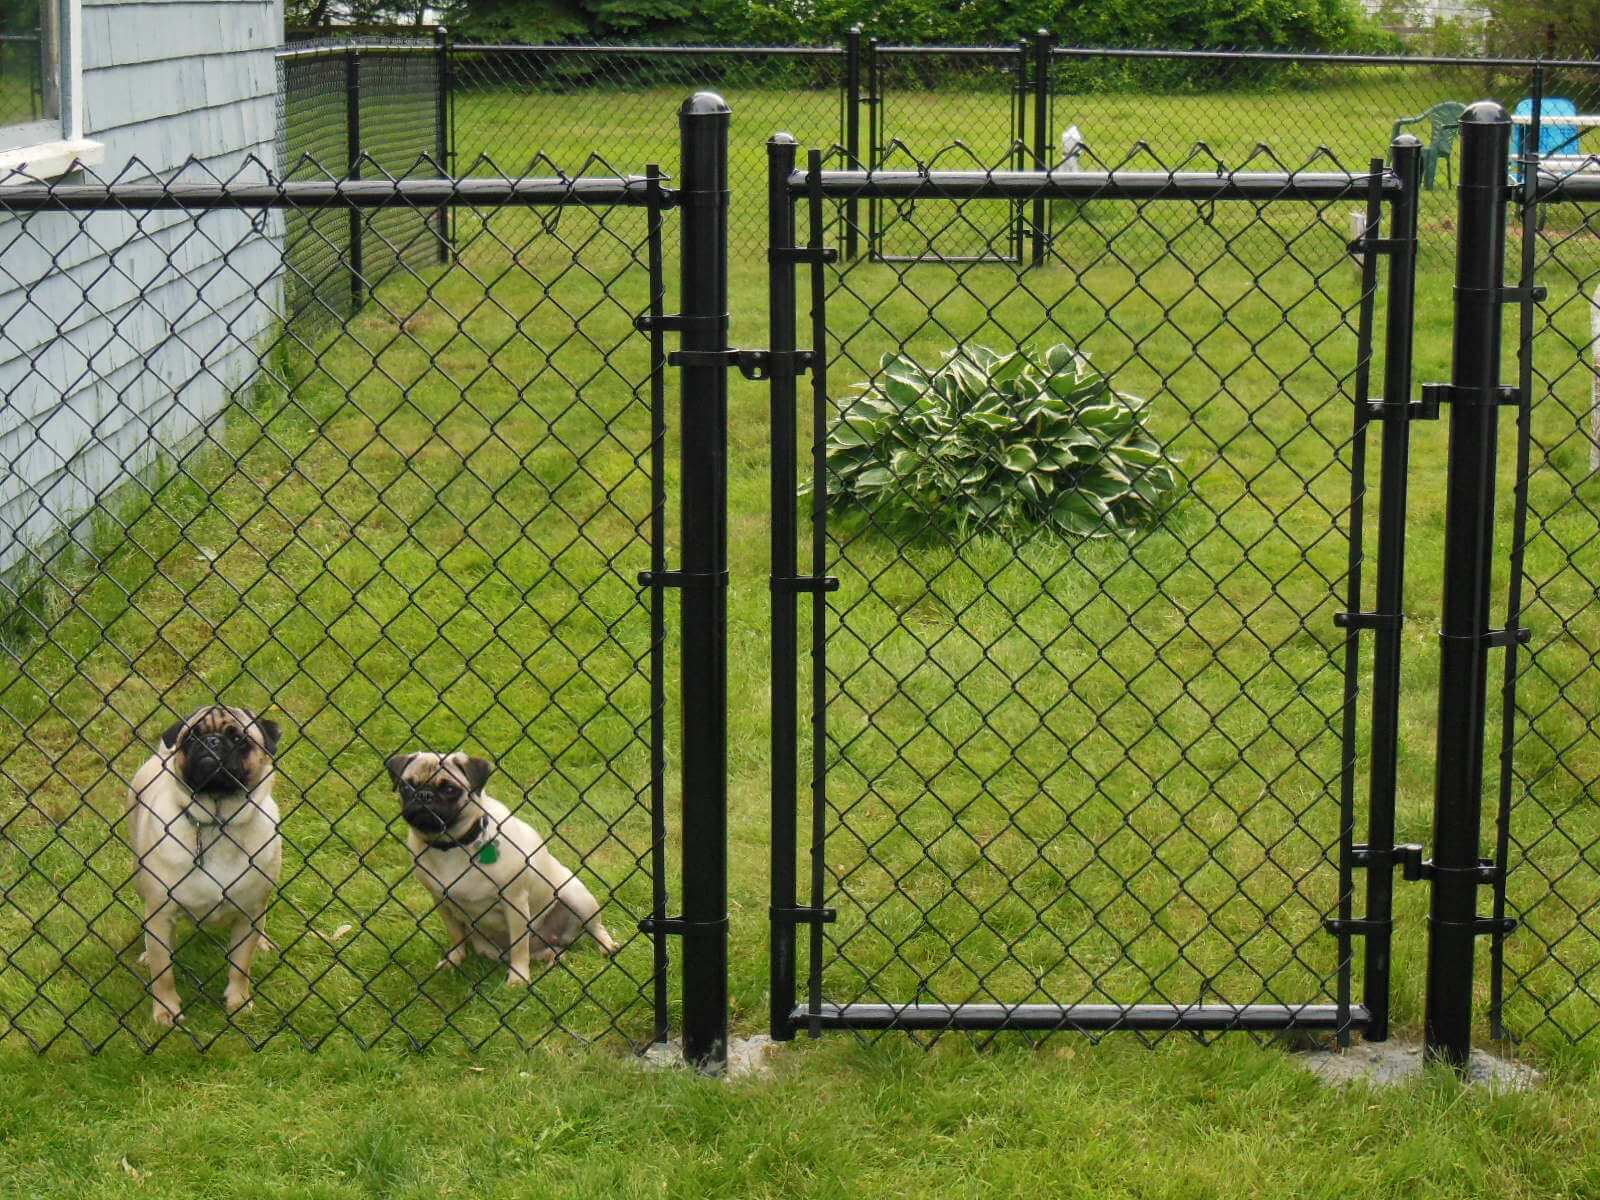 "Diamond Fence: A Timeless and Elegant Fencing Solution"